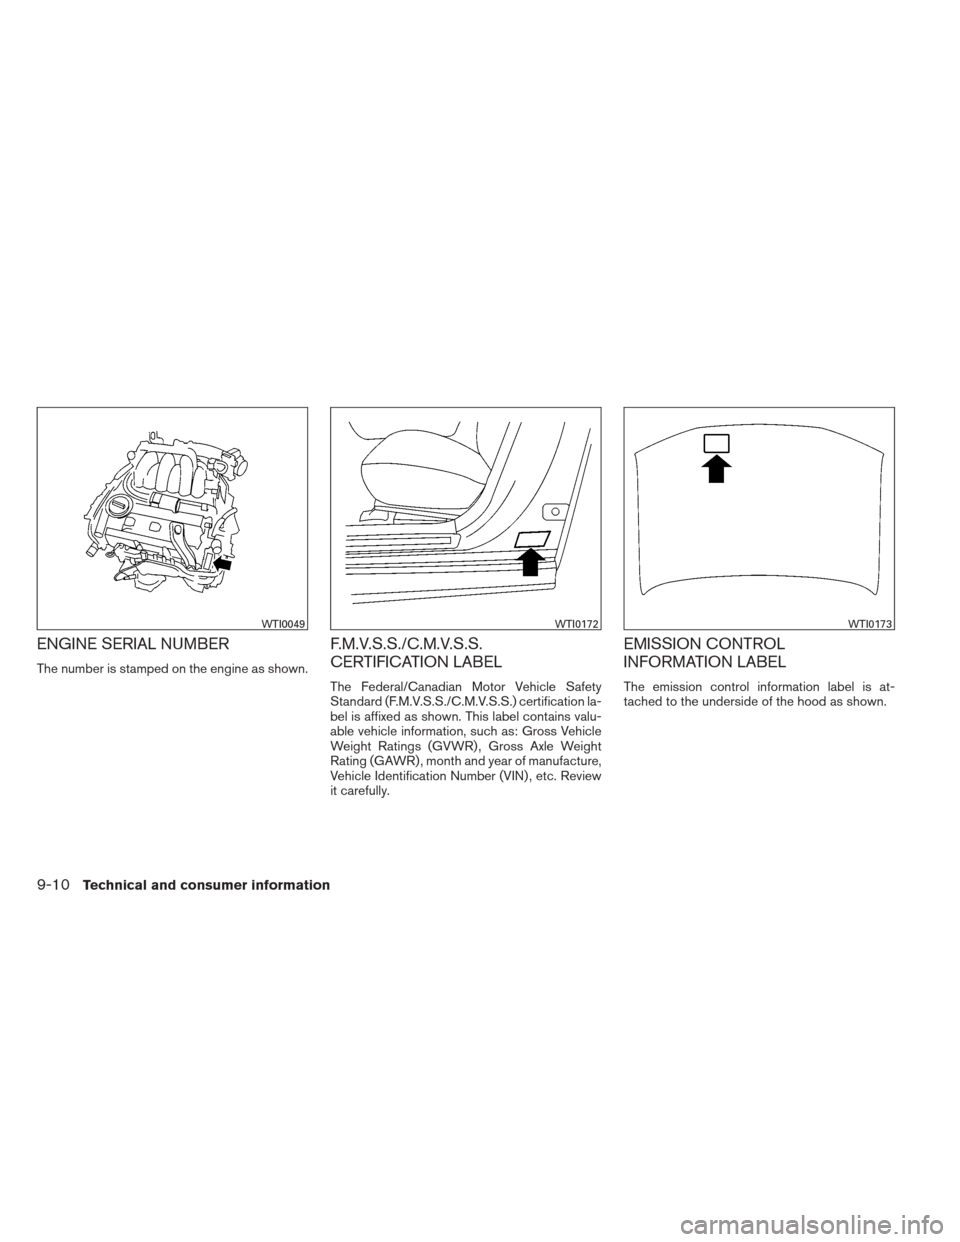 NISSAN MAXIMA 2012 A35 / 7.G Owners Manual ENGINE SERIAL NUMBER
The number is stamped on the engine as shown.
F.M.V.S.S./C.M.V.S.S.
CERTIFICATION LABEL
The Federal/Canadian Motor Vehicle Safety
Standard (F.M.V.S.S./C.M.V.S.S.) certification la